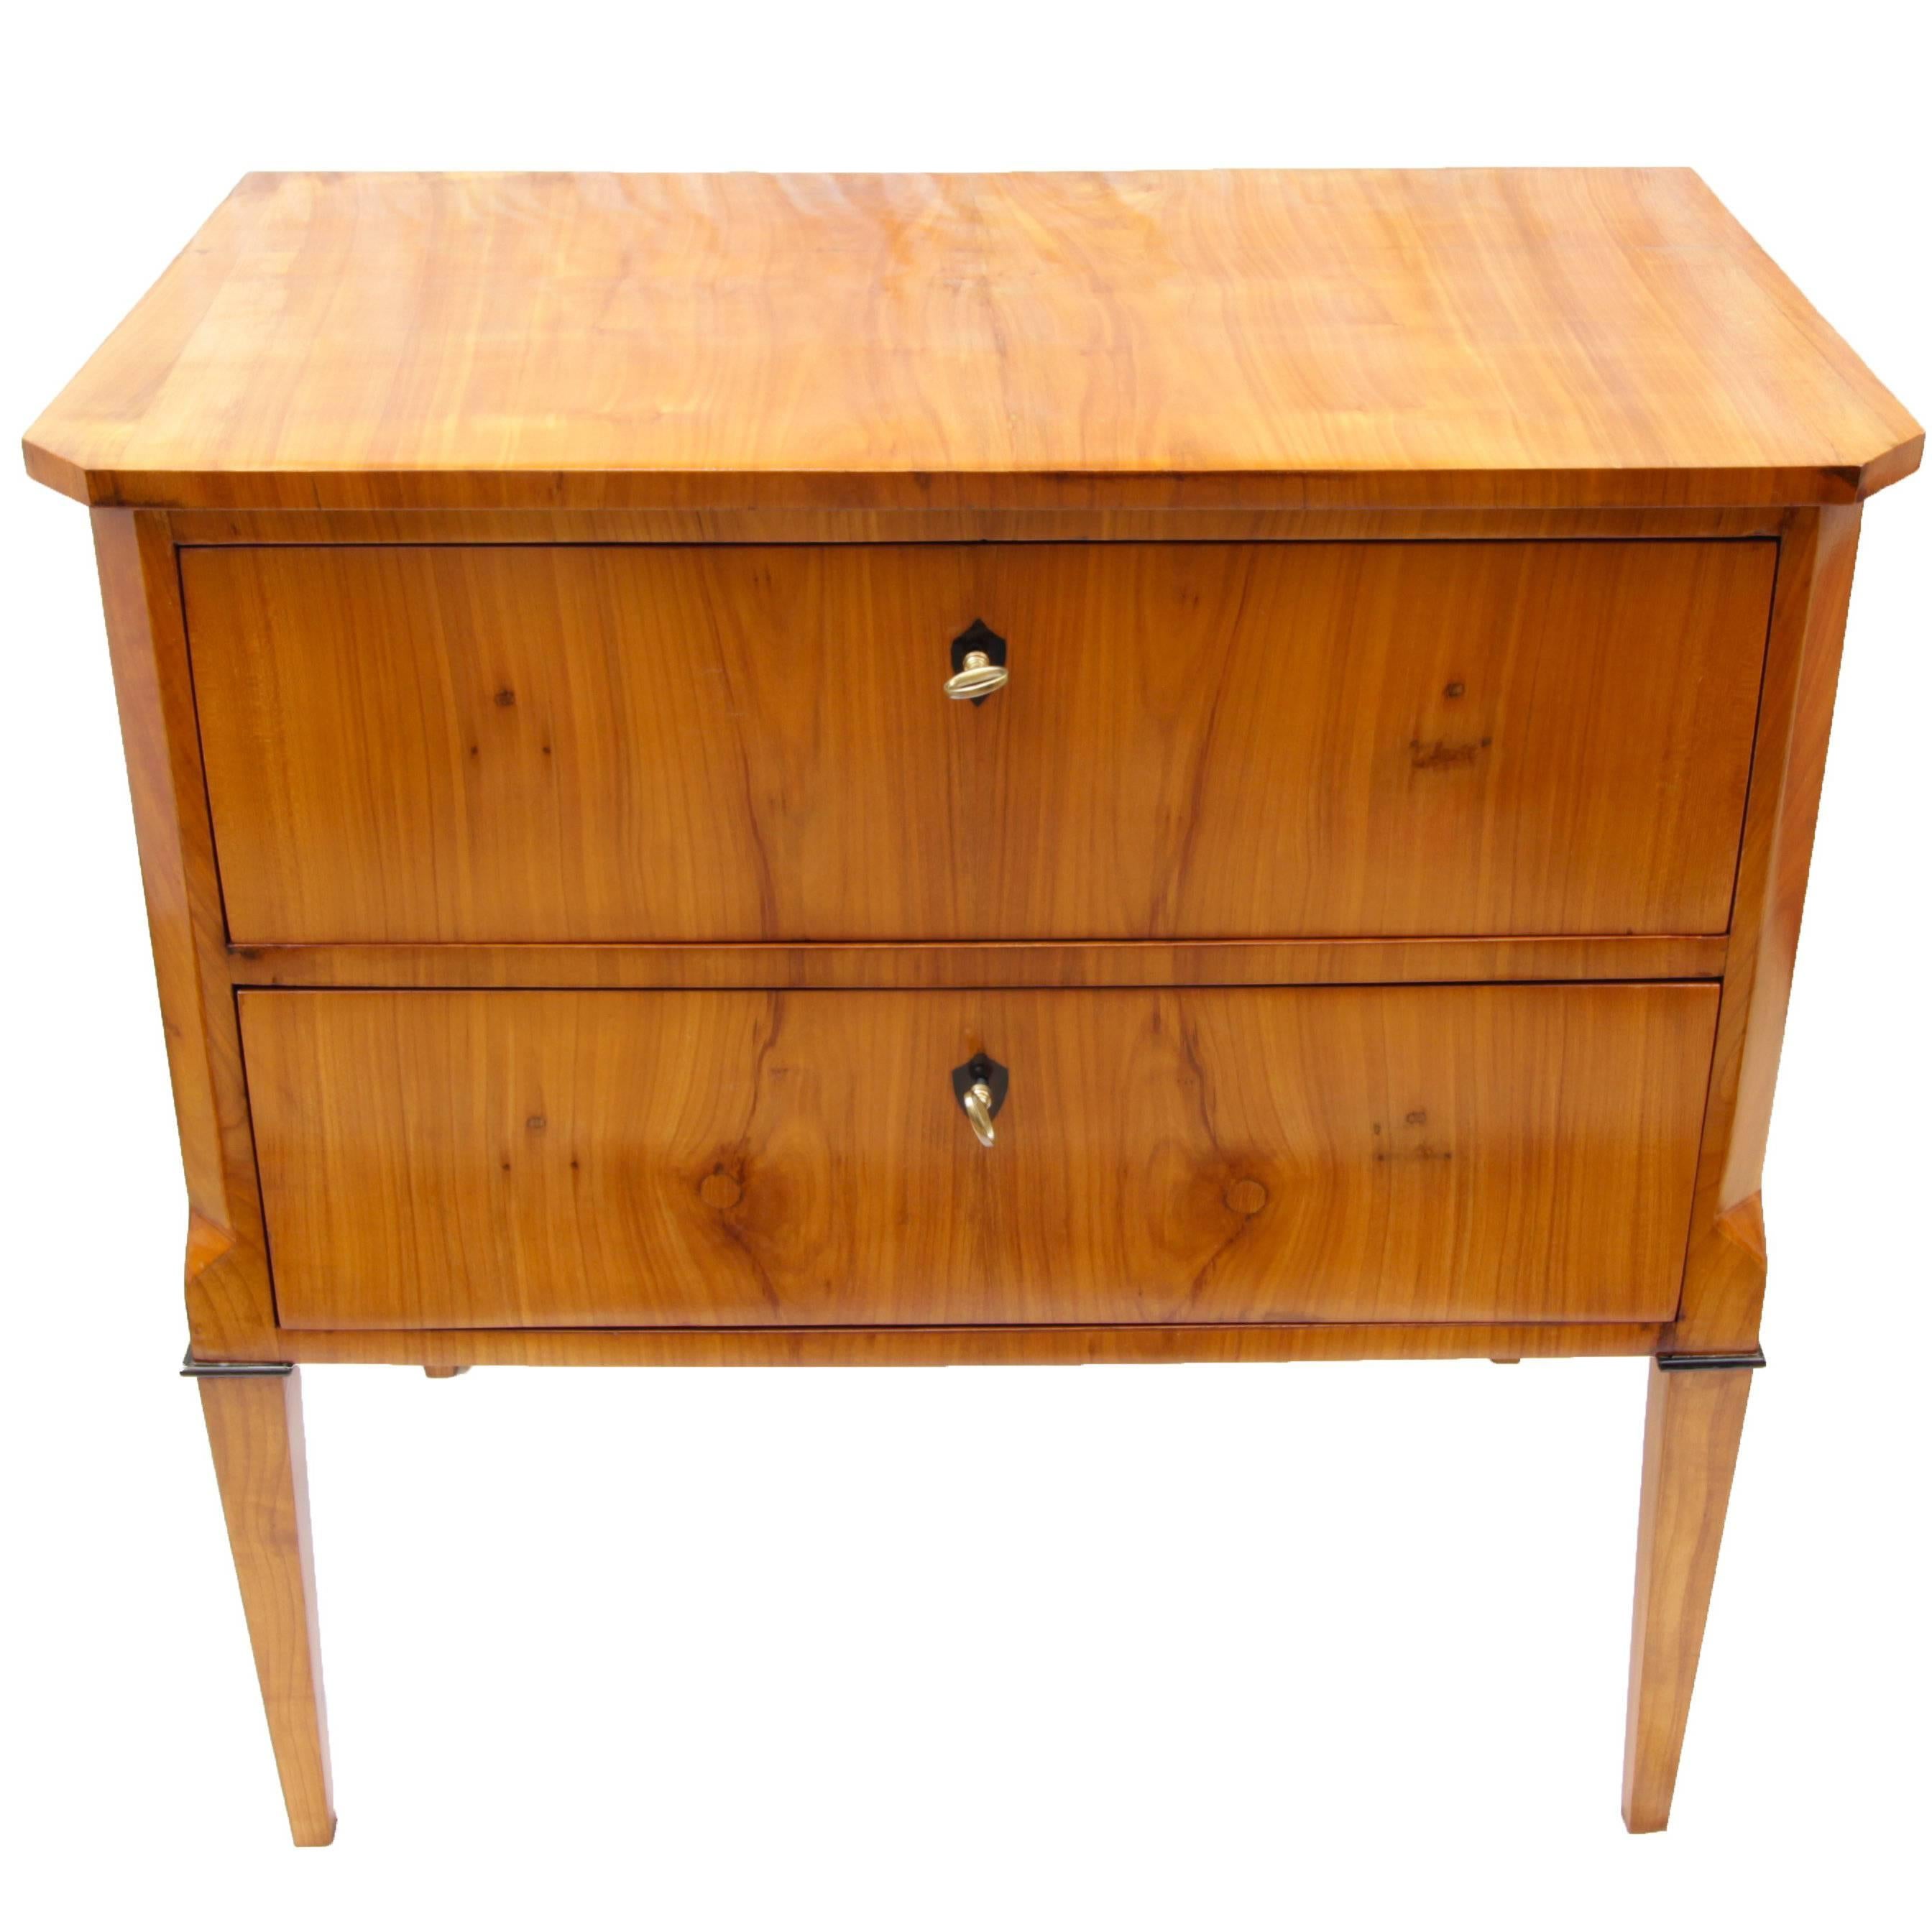 Early 19th Century Small Biedermeier Cherry Wood Chest of Drawers, circa 1820